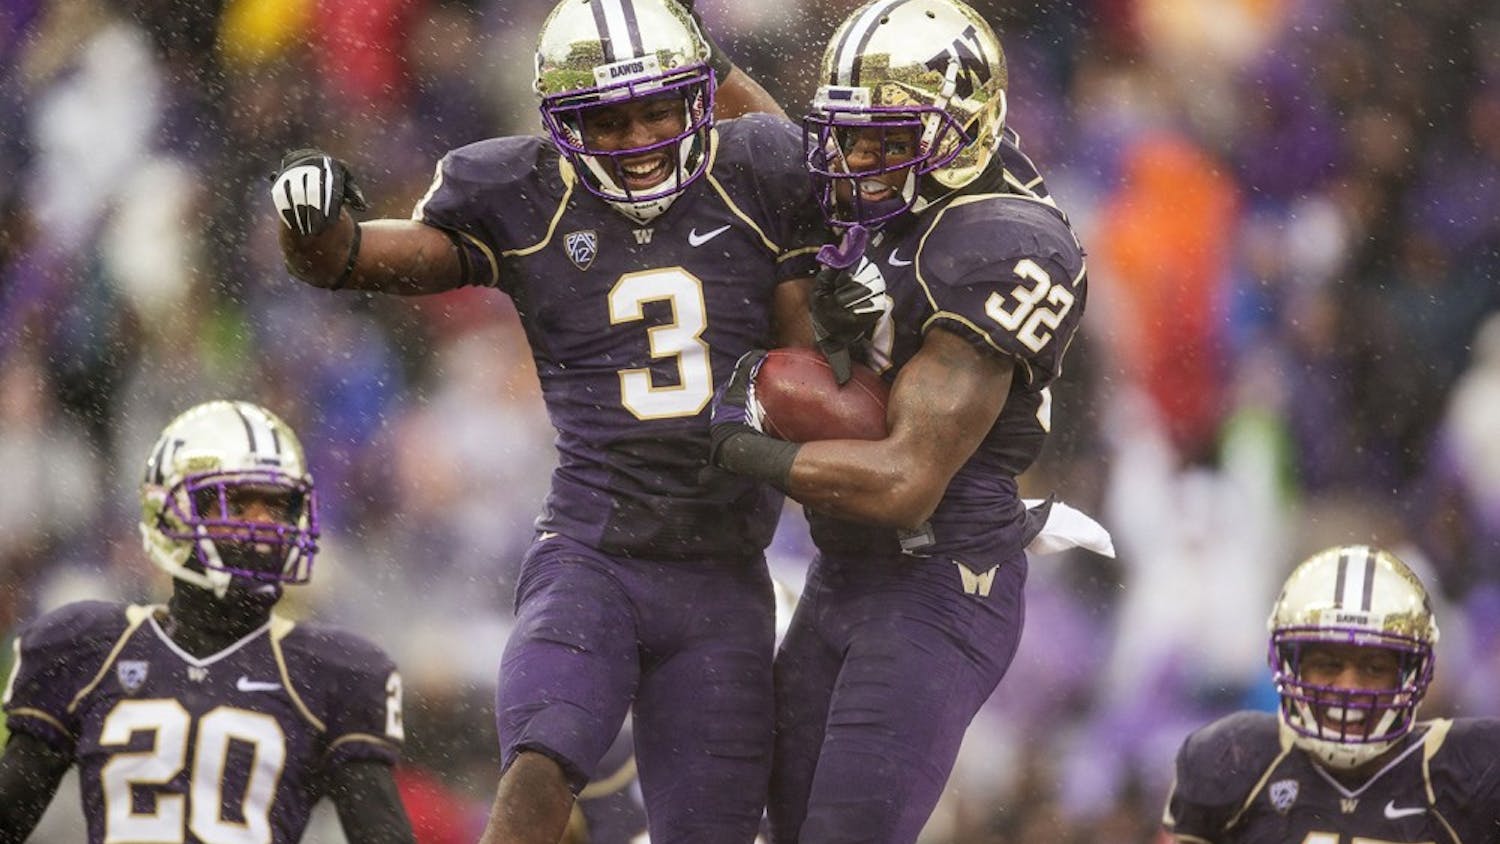 Washington&apos;s Cleveland Wallace (3) and Tre Watson (32) celebrate a safety against Arizona in the first quarter at Husky Stadium in Seattle, Washington, on Saturday, September 28, 2013. (Dean Rutz/Seattle Times/MCT)